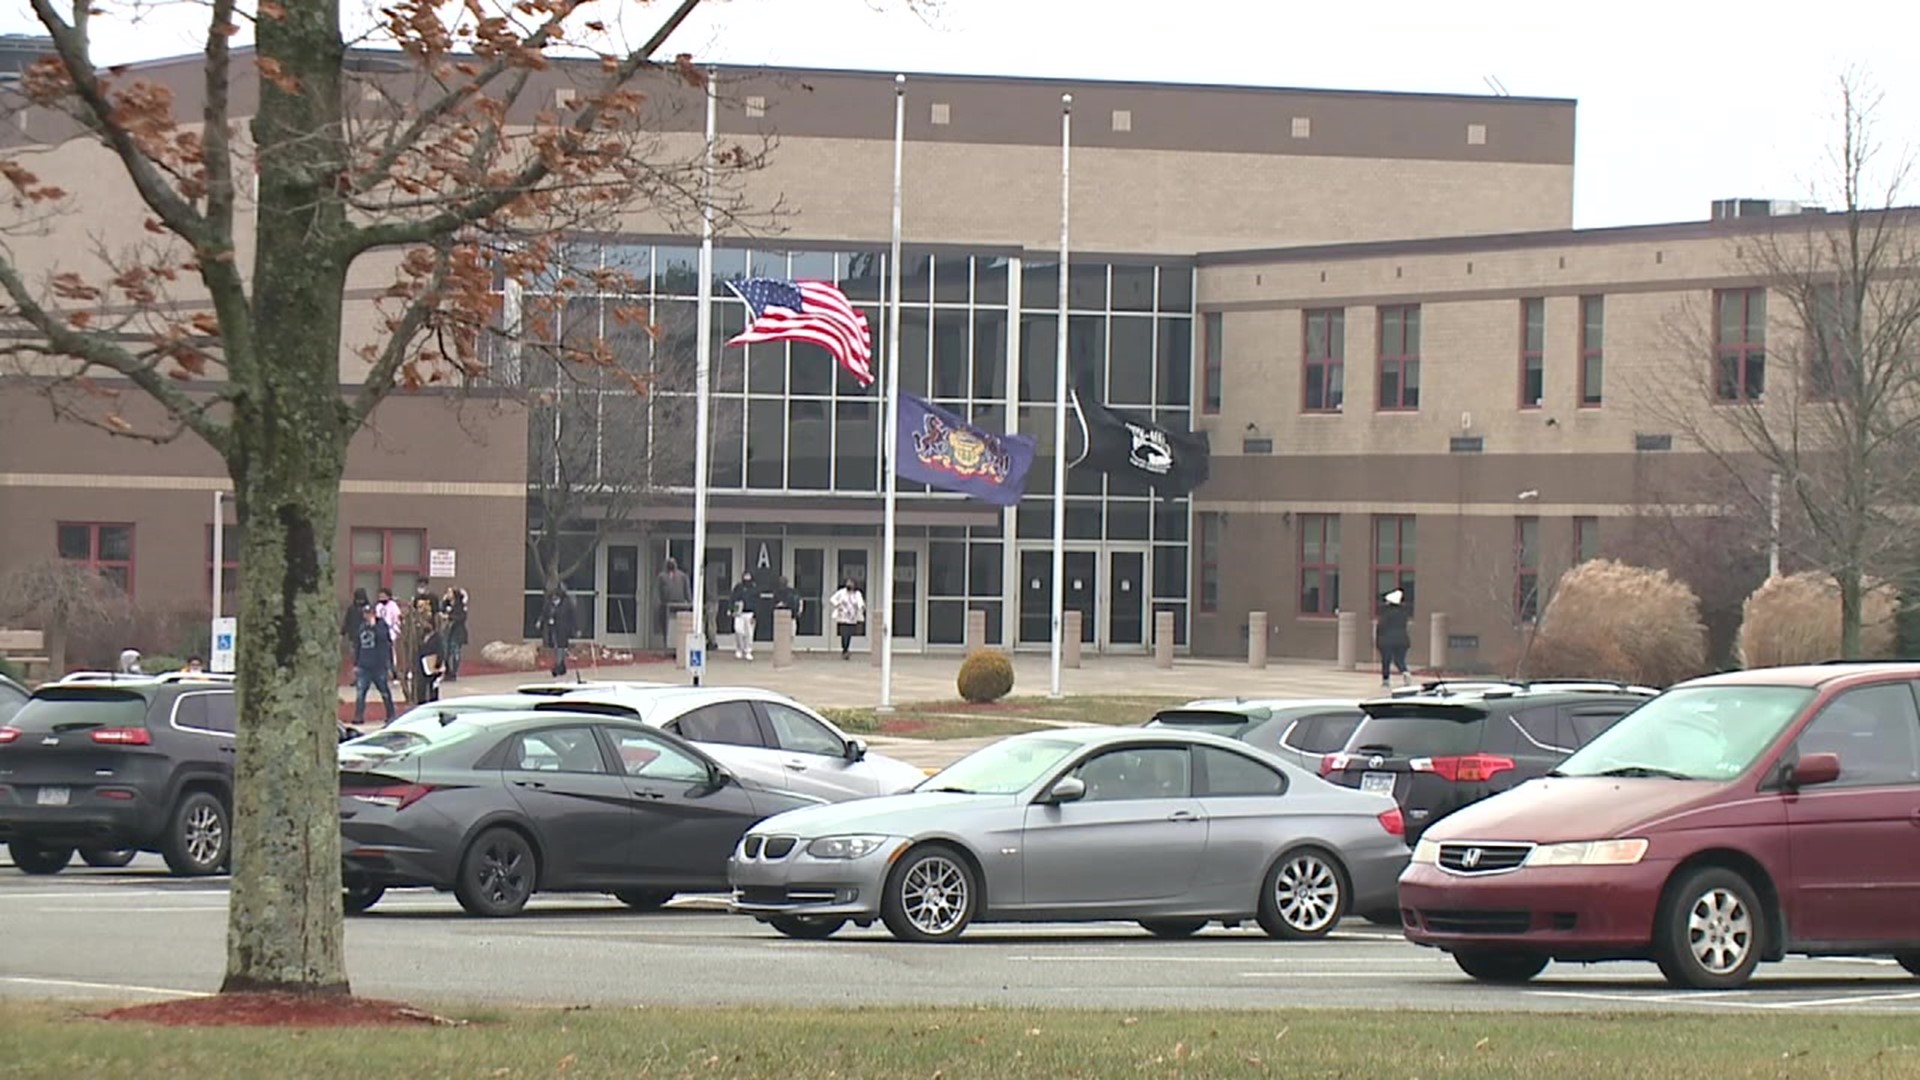 Some students got into a fight with a group of "non-students" in a parking lot near the Hazleton Area High School last week.